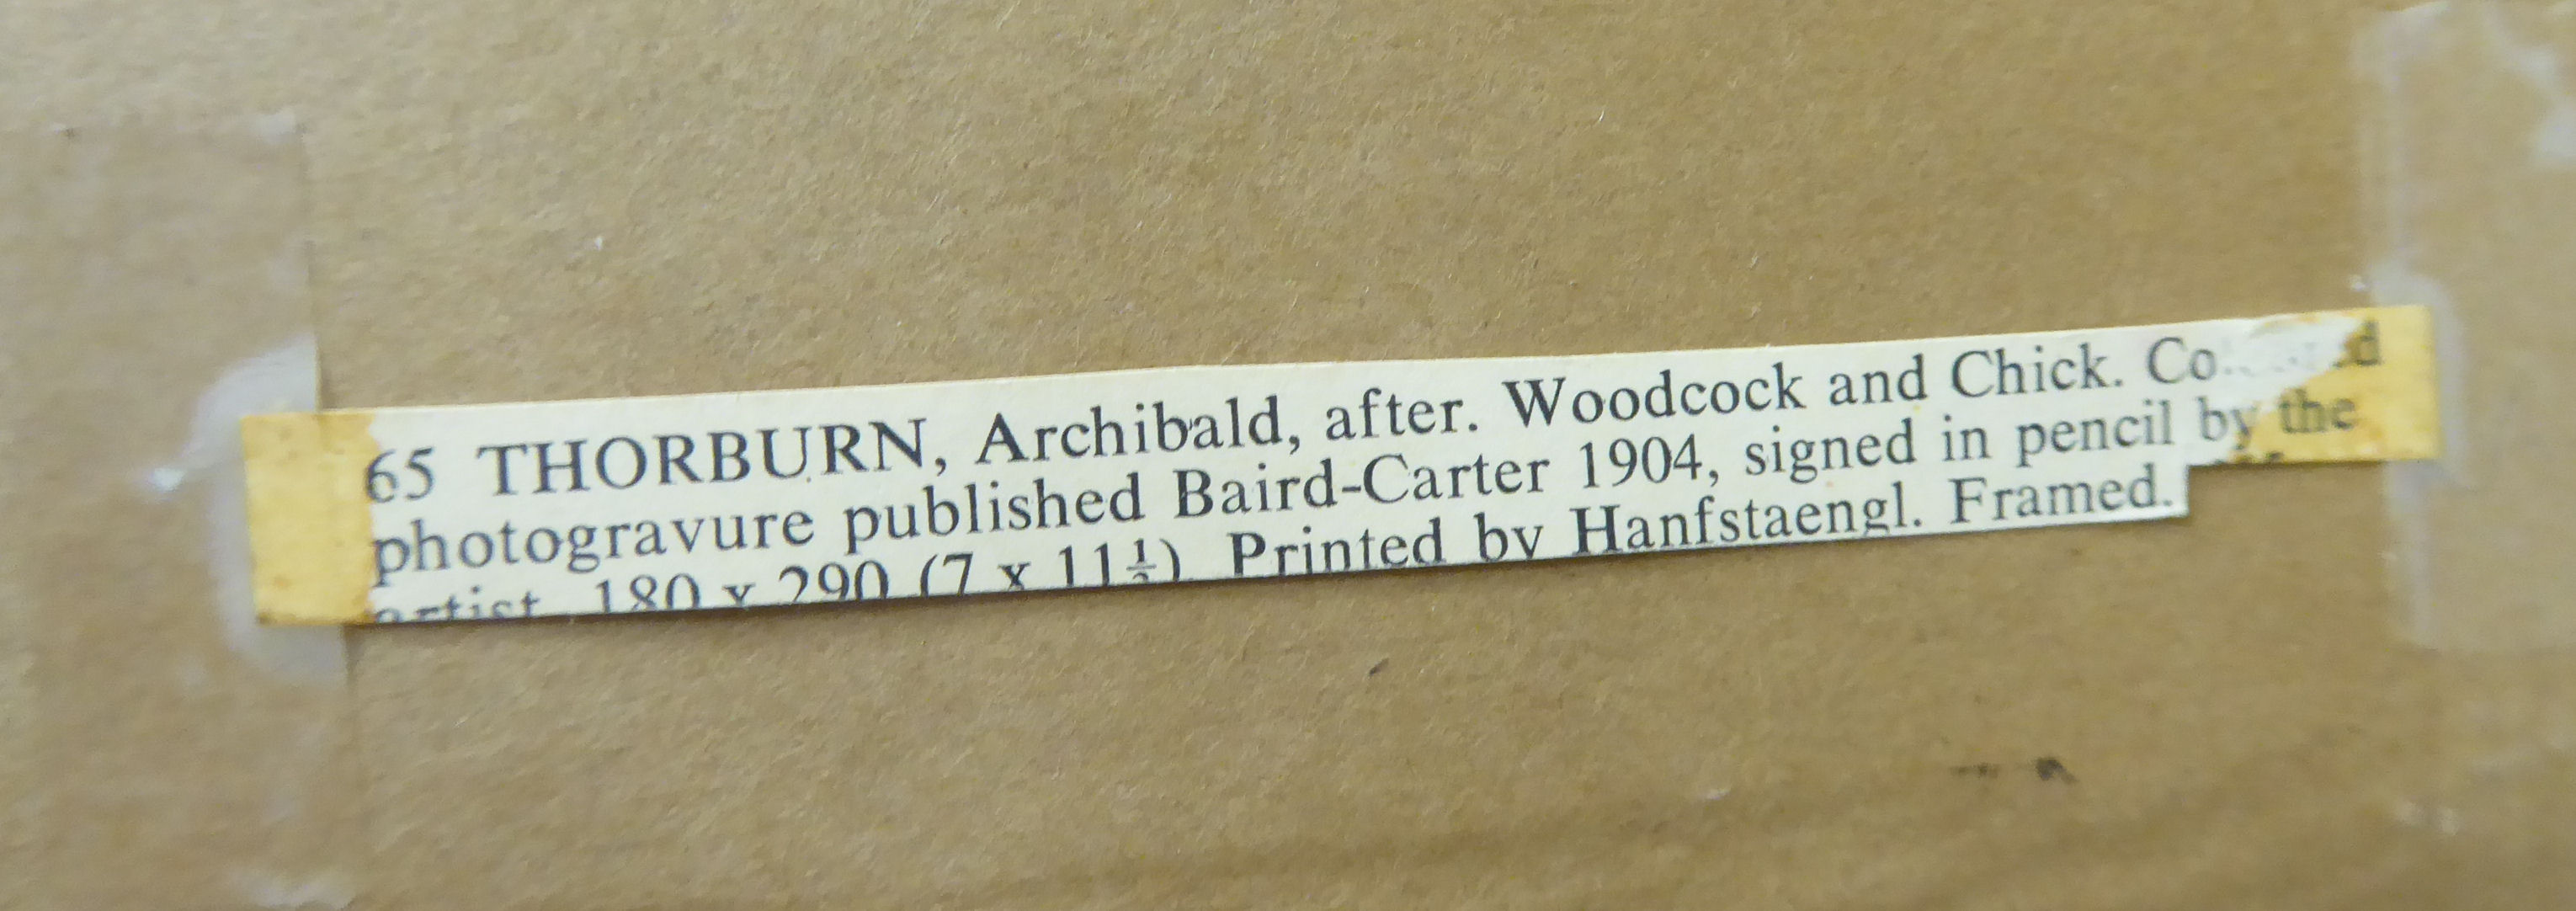 Archibald Thorburn - a woodcock and chick print bears a pencil signature 7'' x 11. - Image 3 of 3